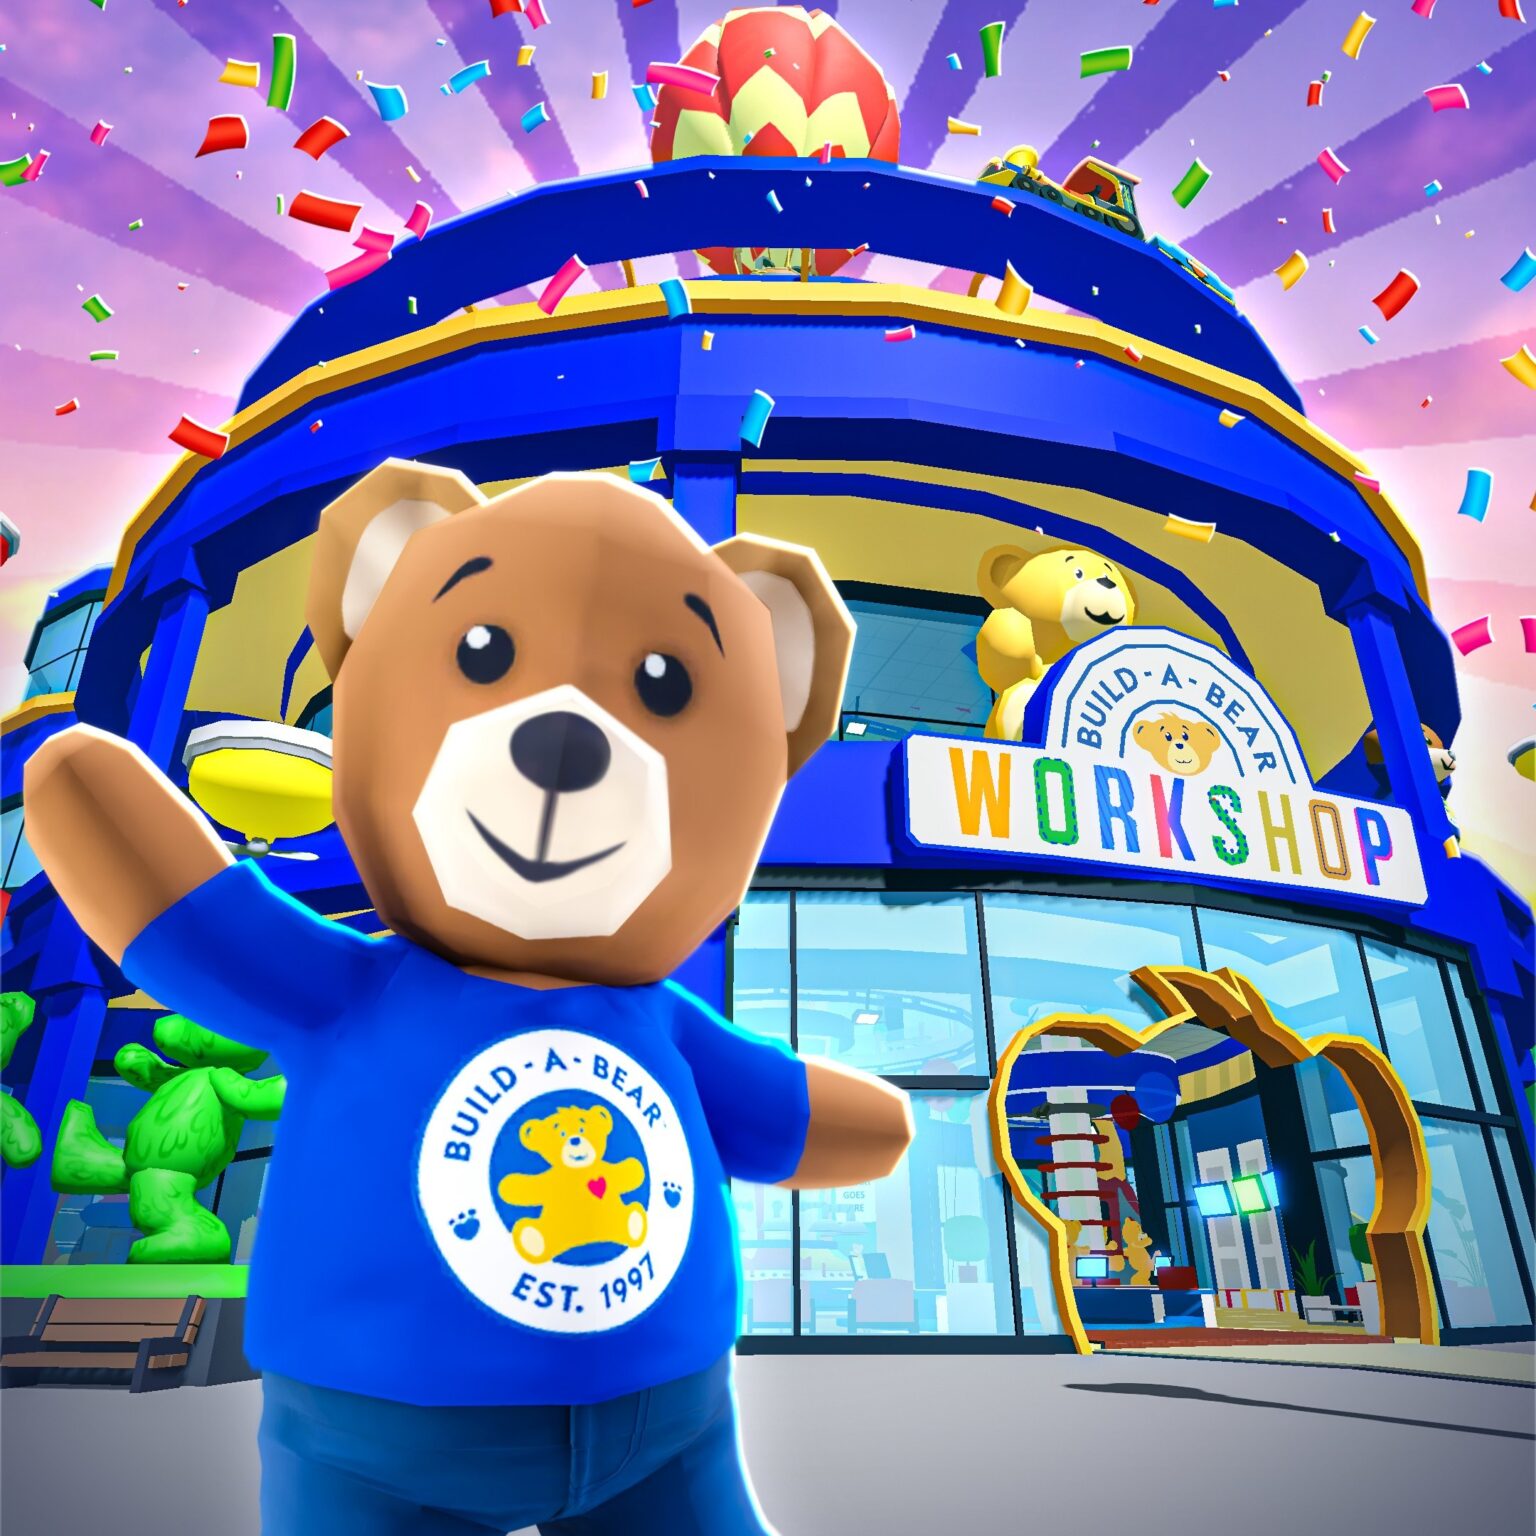 BUILDABEAR TYCOON GAME LAUNCHES ON ROBLOX